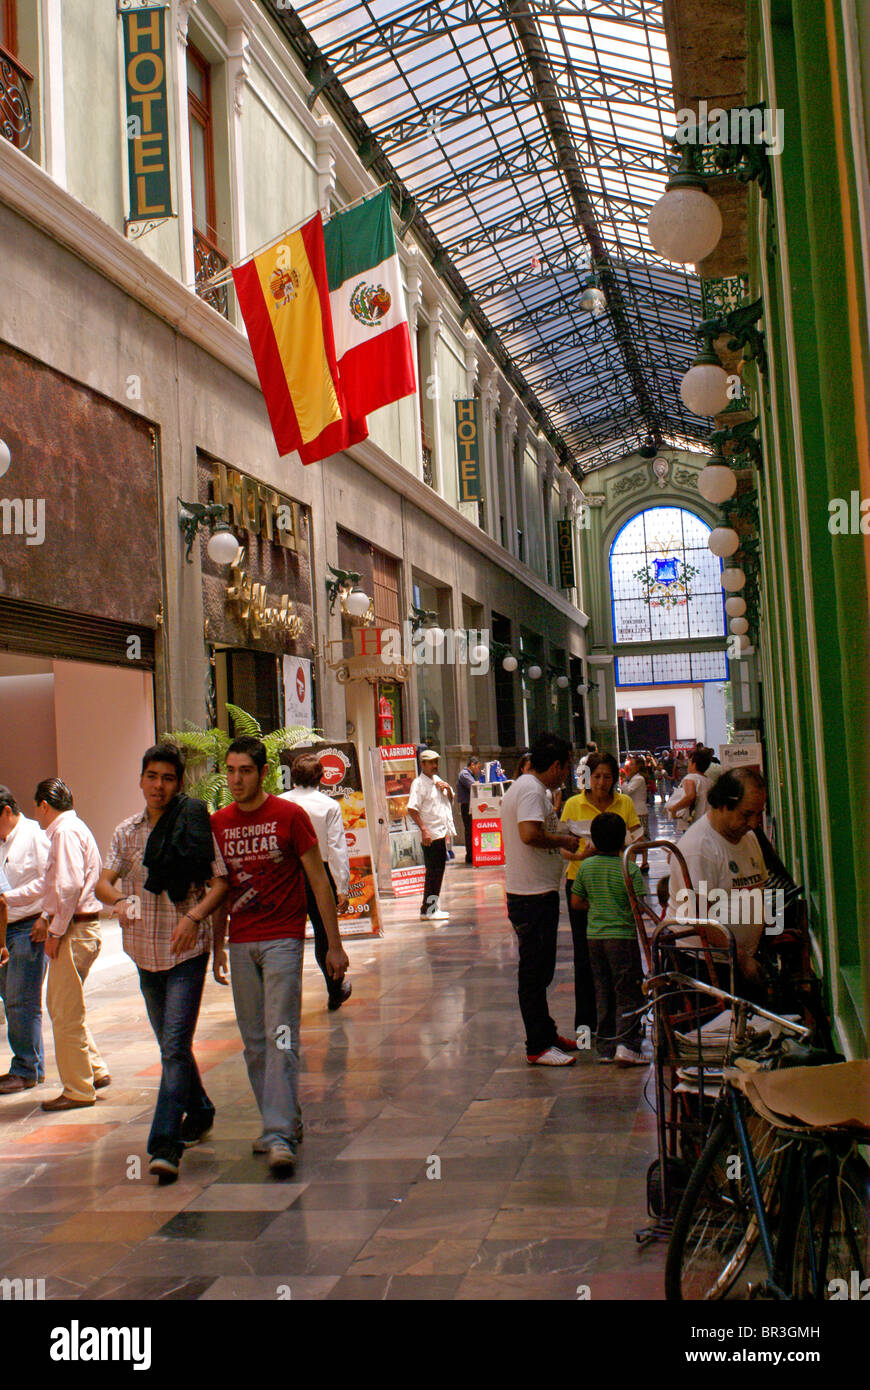 People in a covered pedestrian walkway and shopping mall, Puebla, Mexico. Puebla is a UNESCO World Heritage Site. Stock Photo